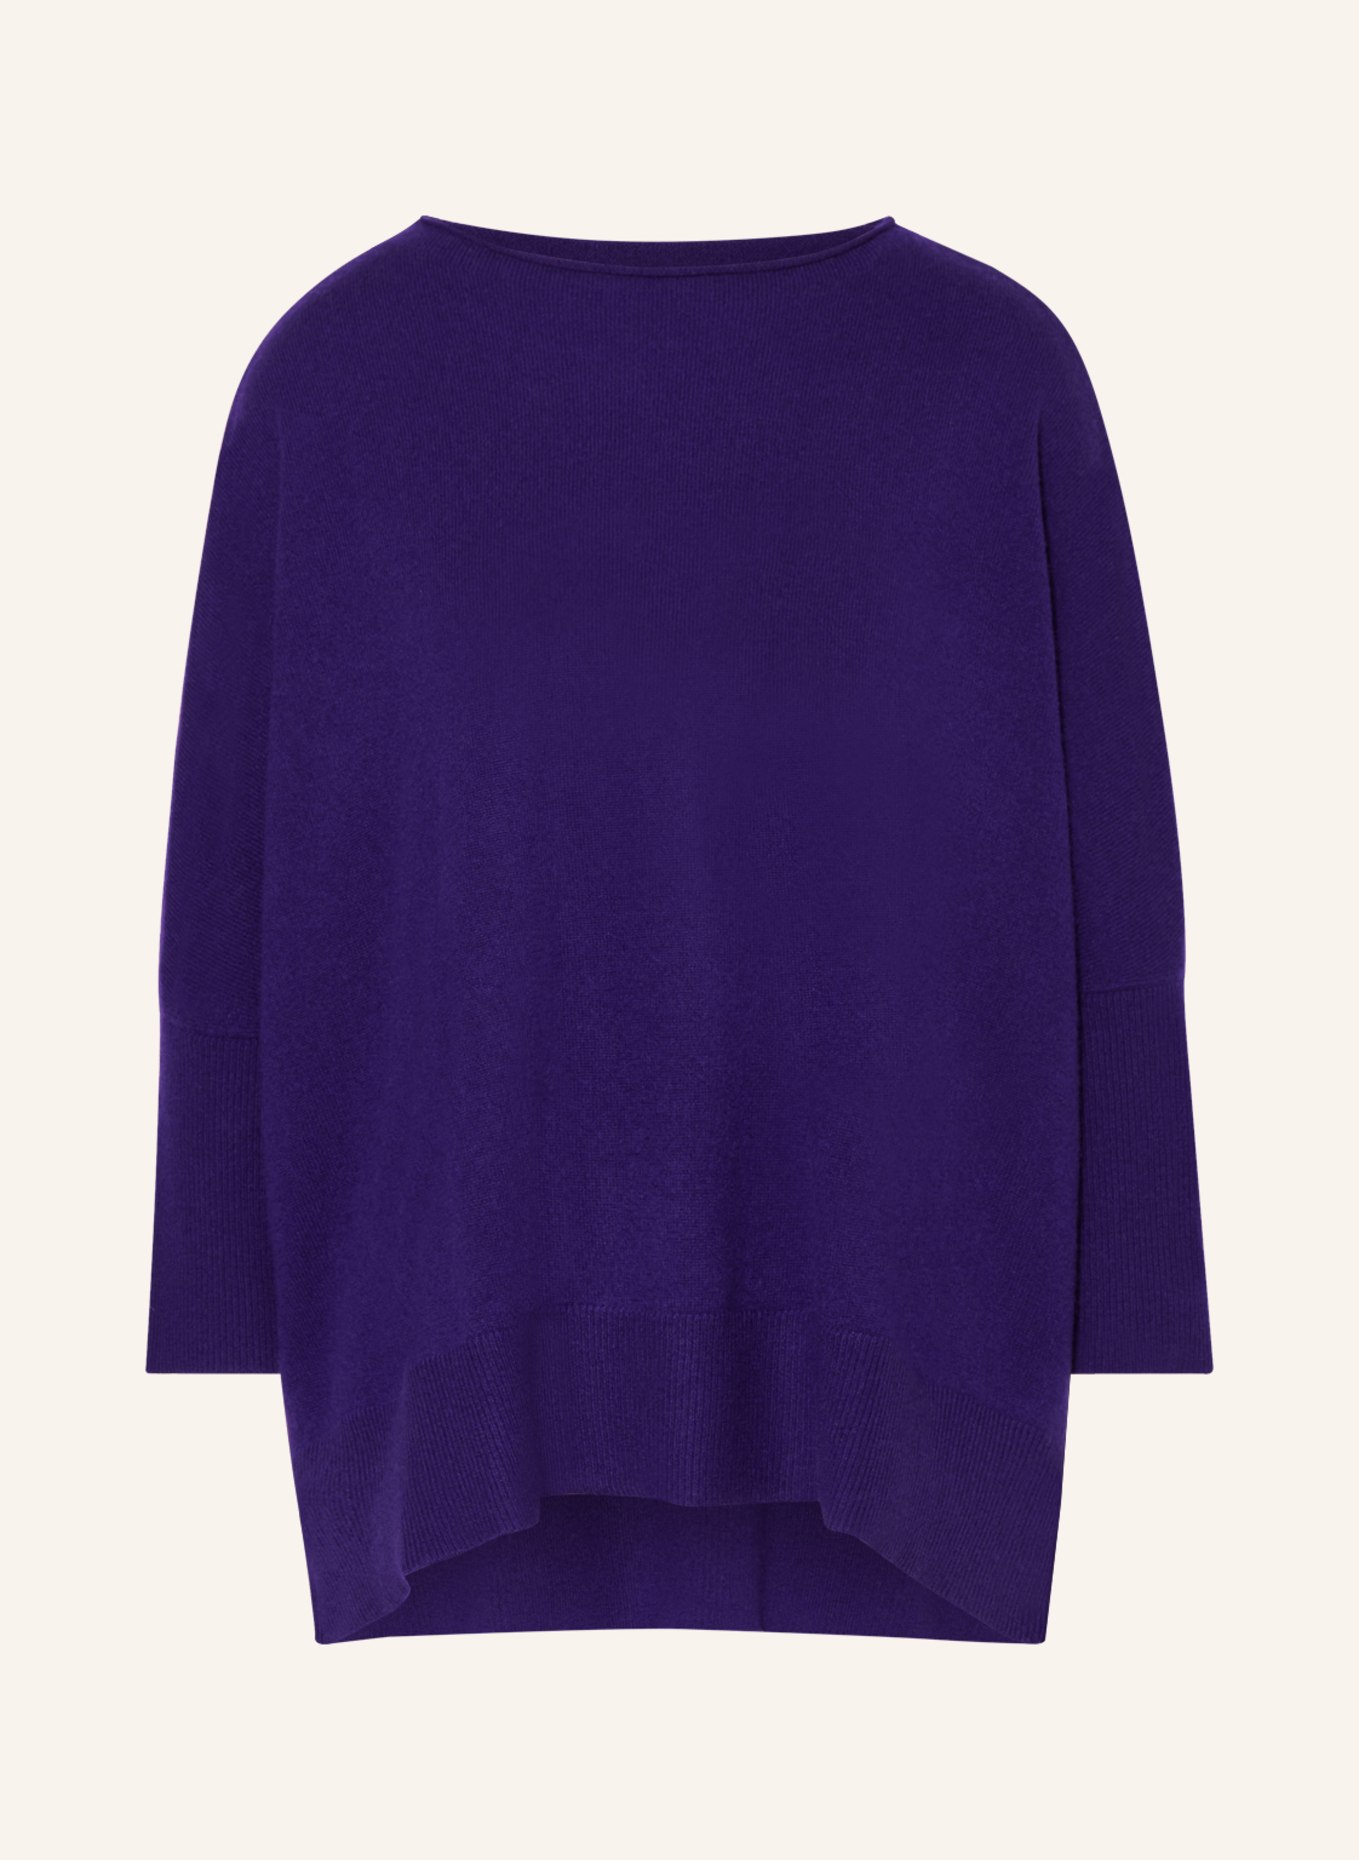 (THE MERCER) N.Y. Cashmere sweater, Color: DARK PURPLE (Image 1)